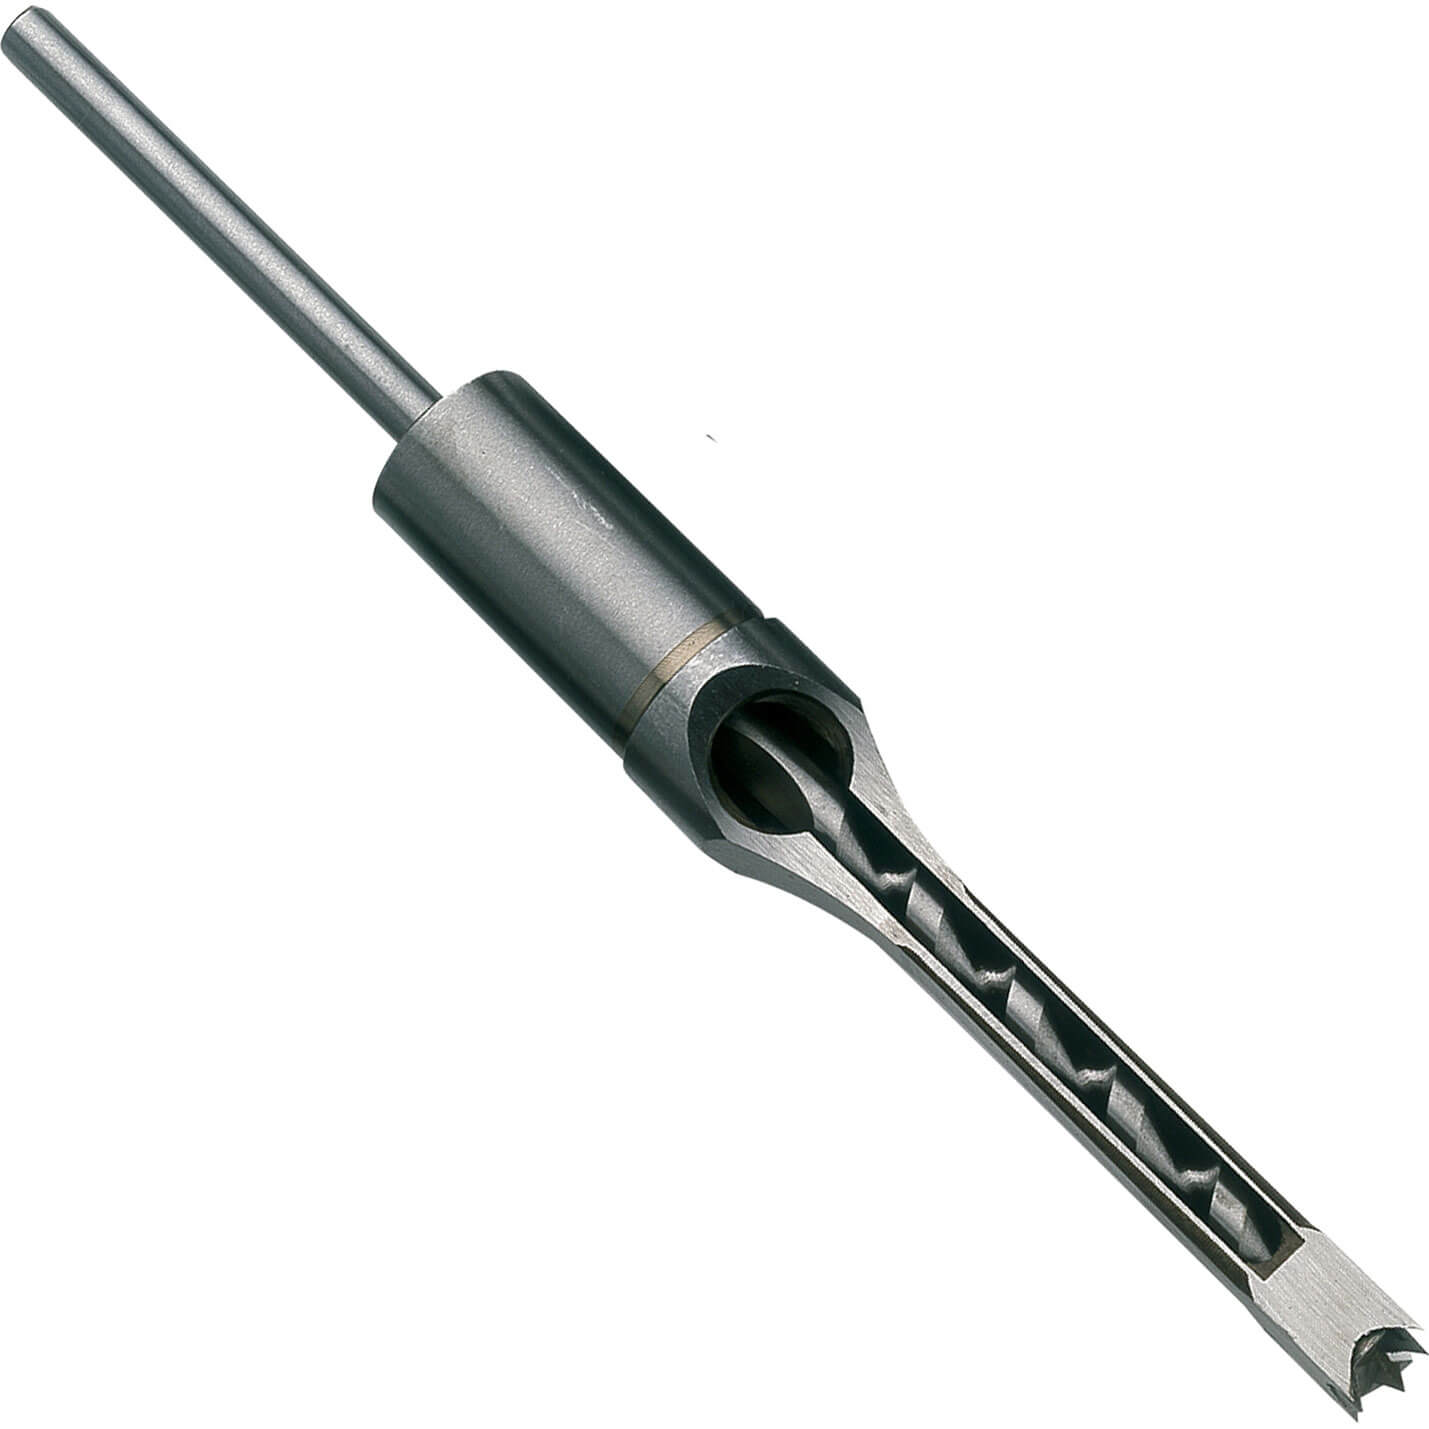 Record Power Chisel & Bit 1/4" For RPM75